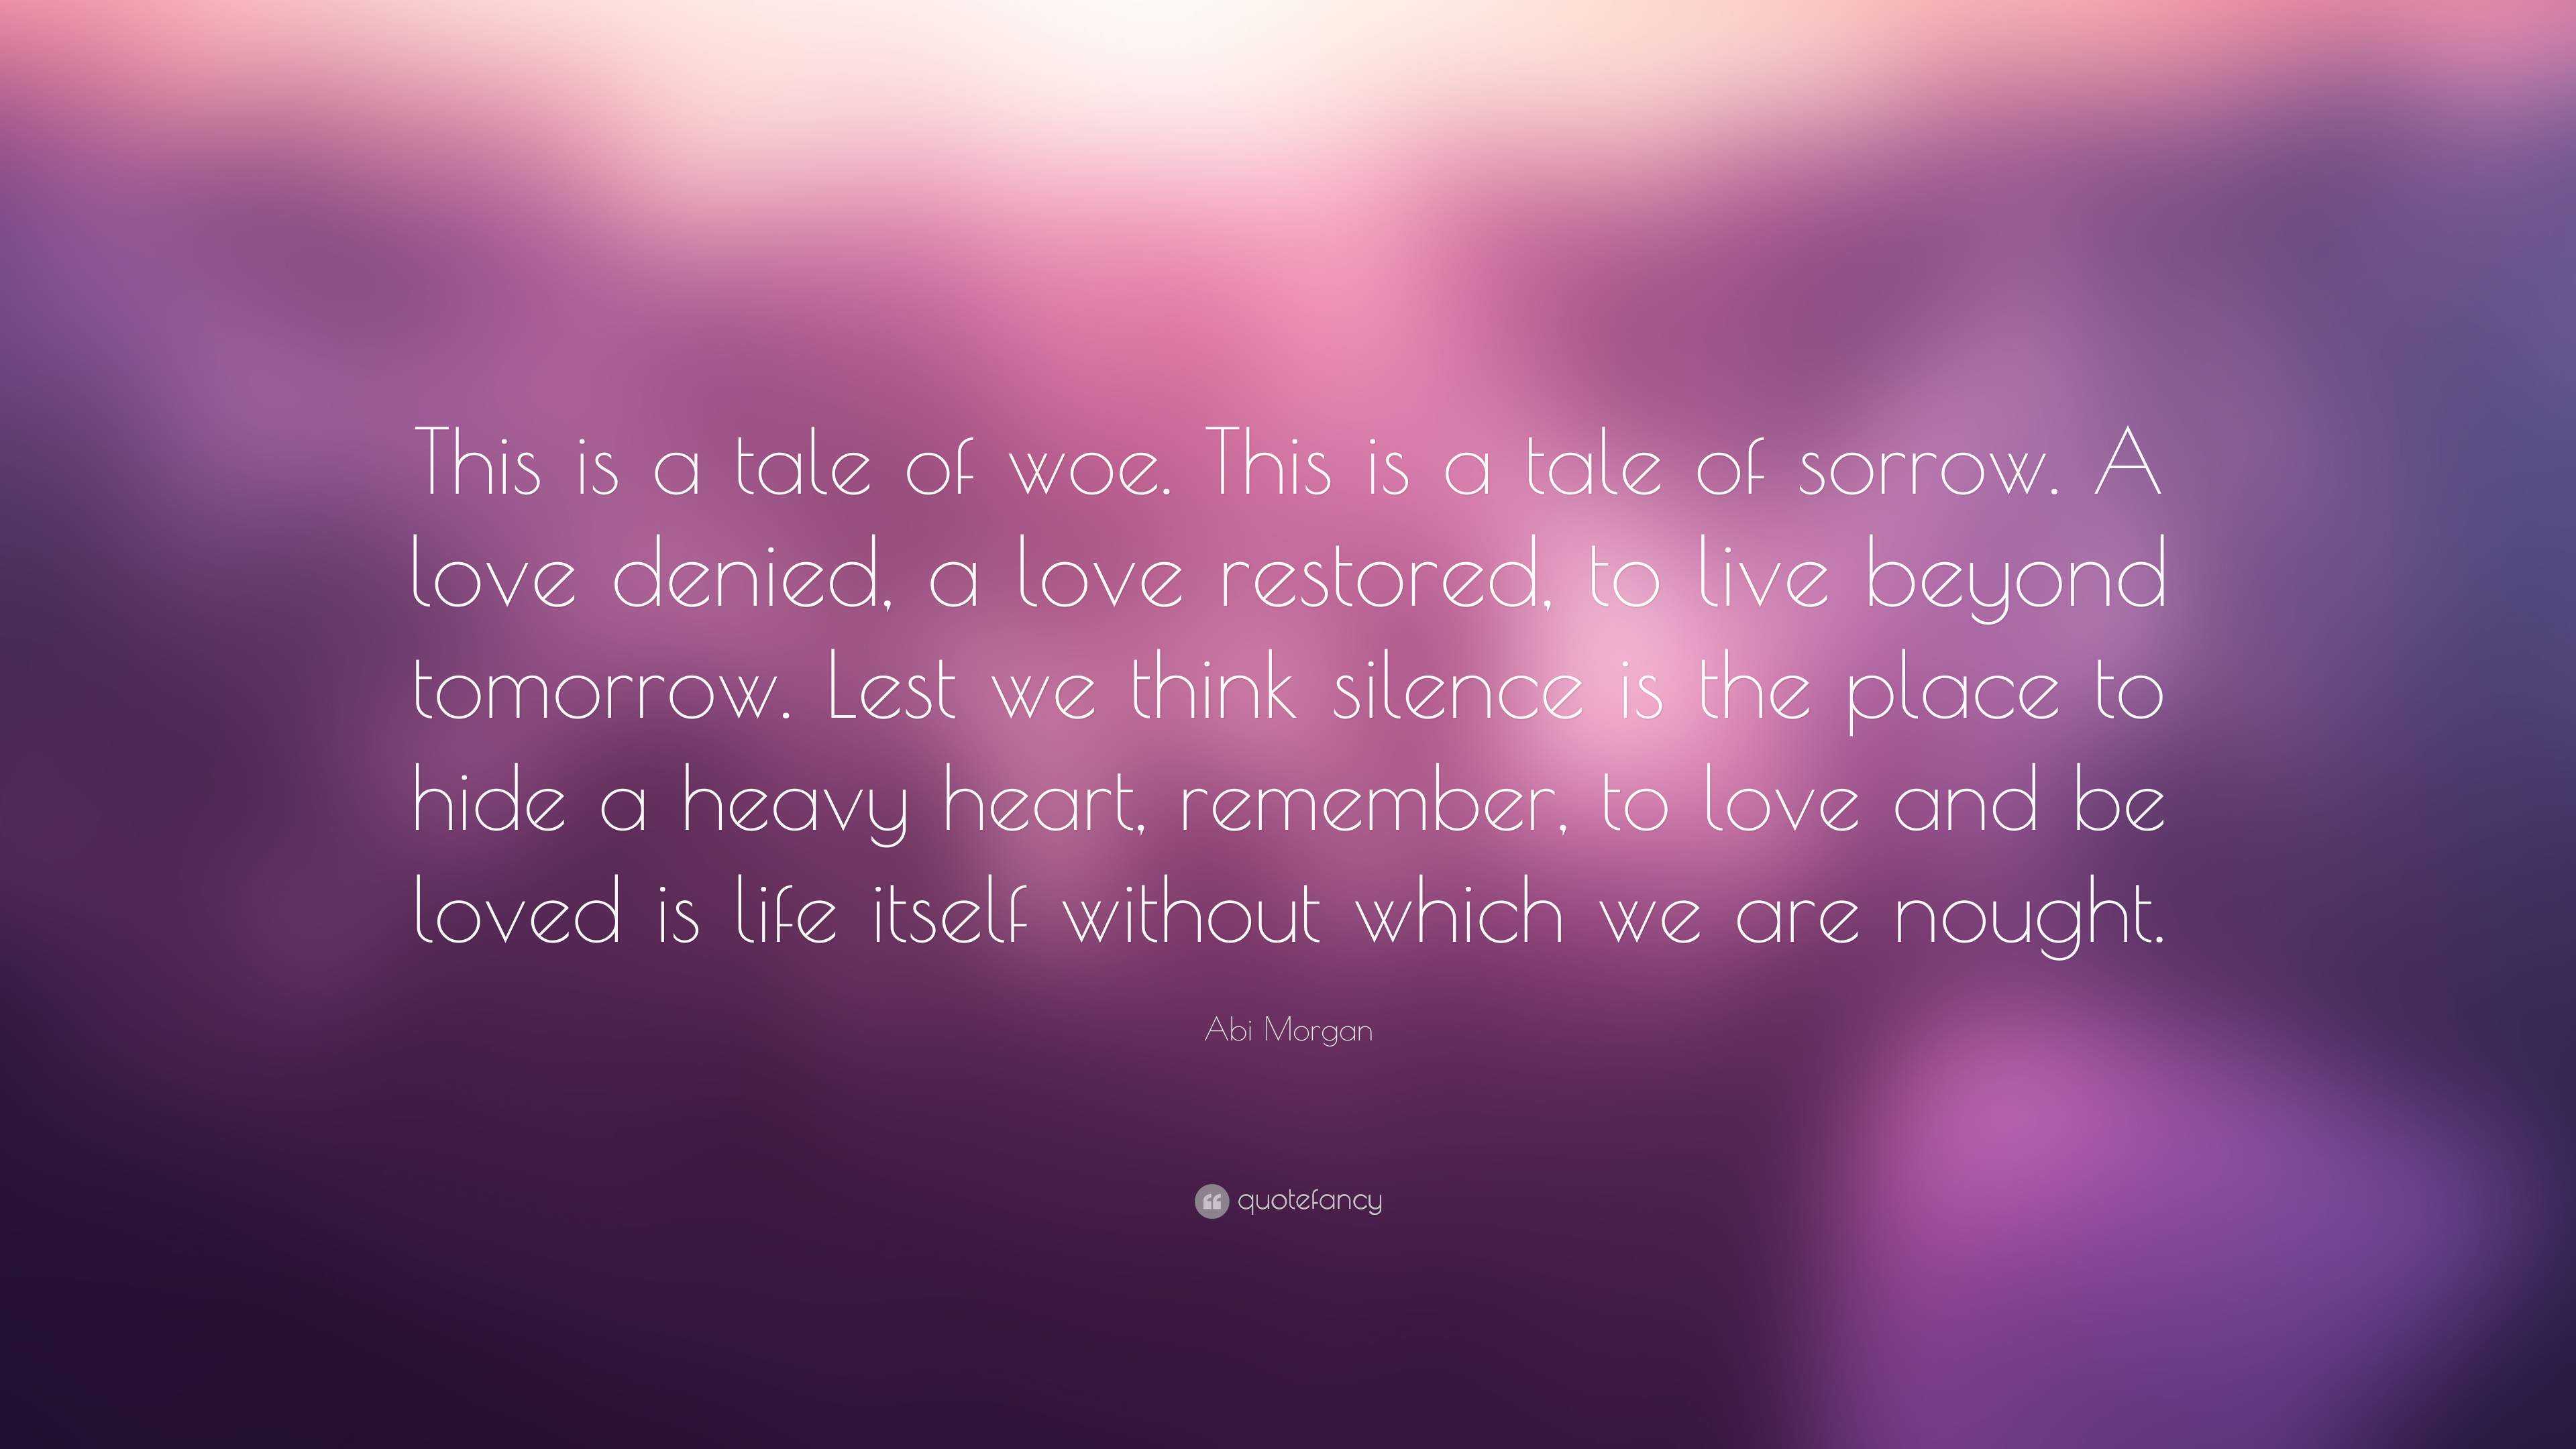 Abi Morgan Quote: “This is a tale of woe. This is a tale of sorrow. A ...